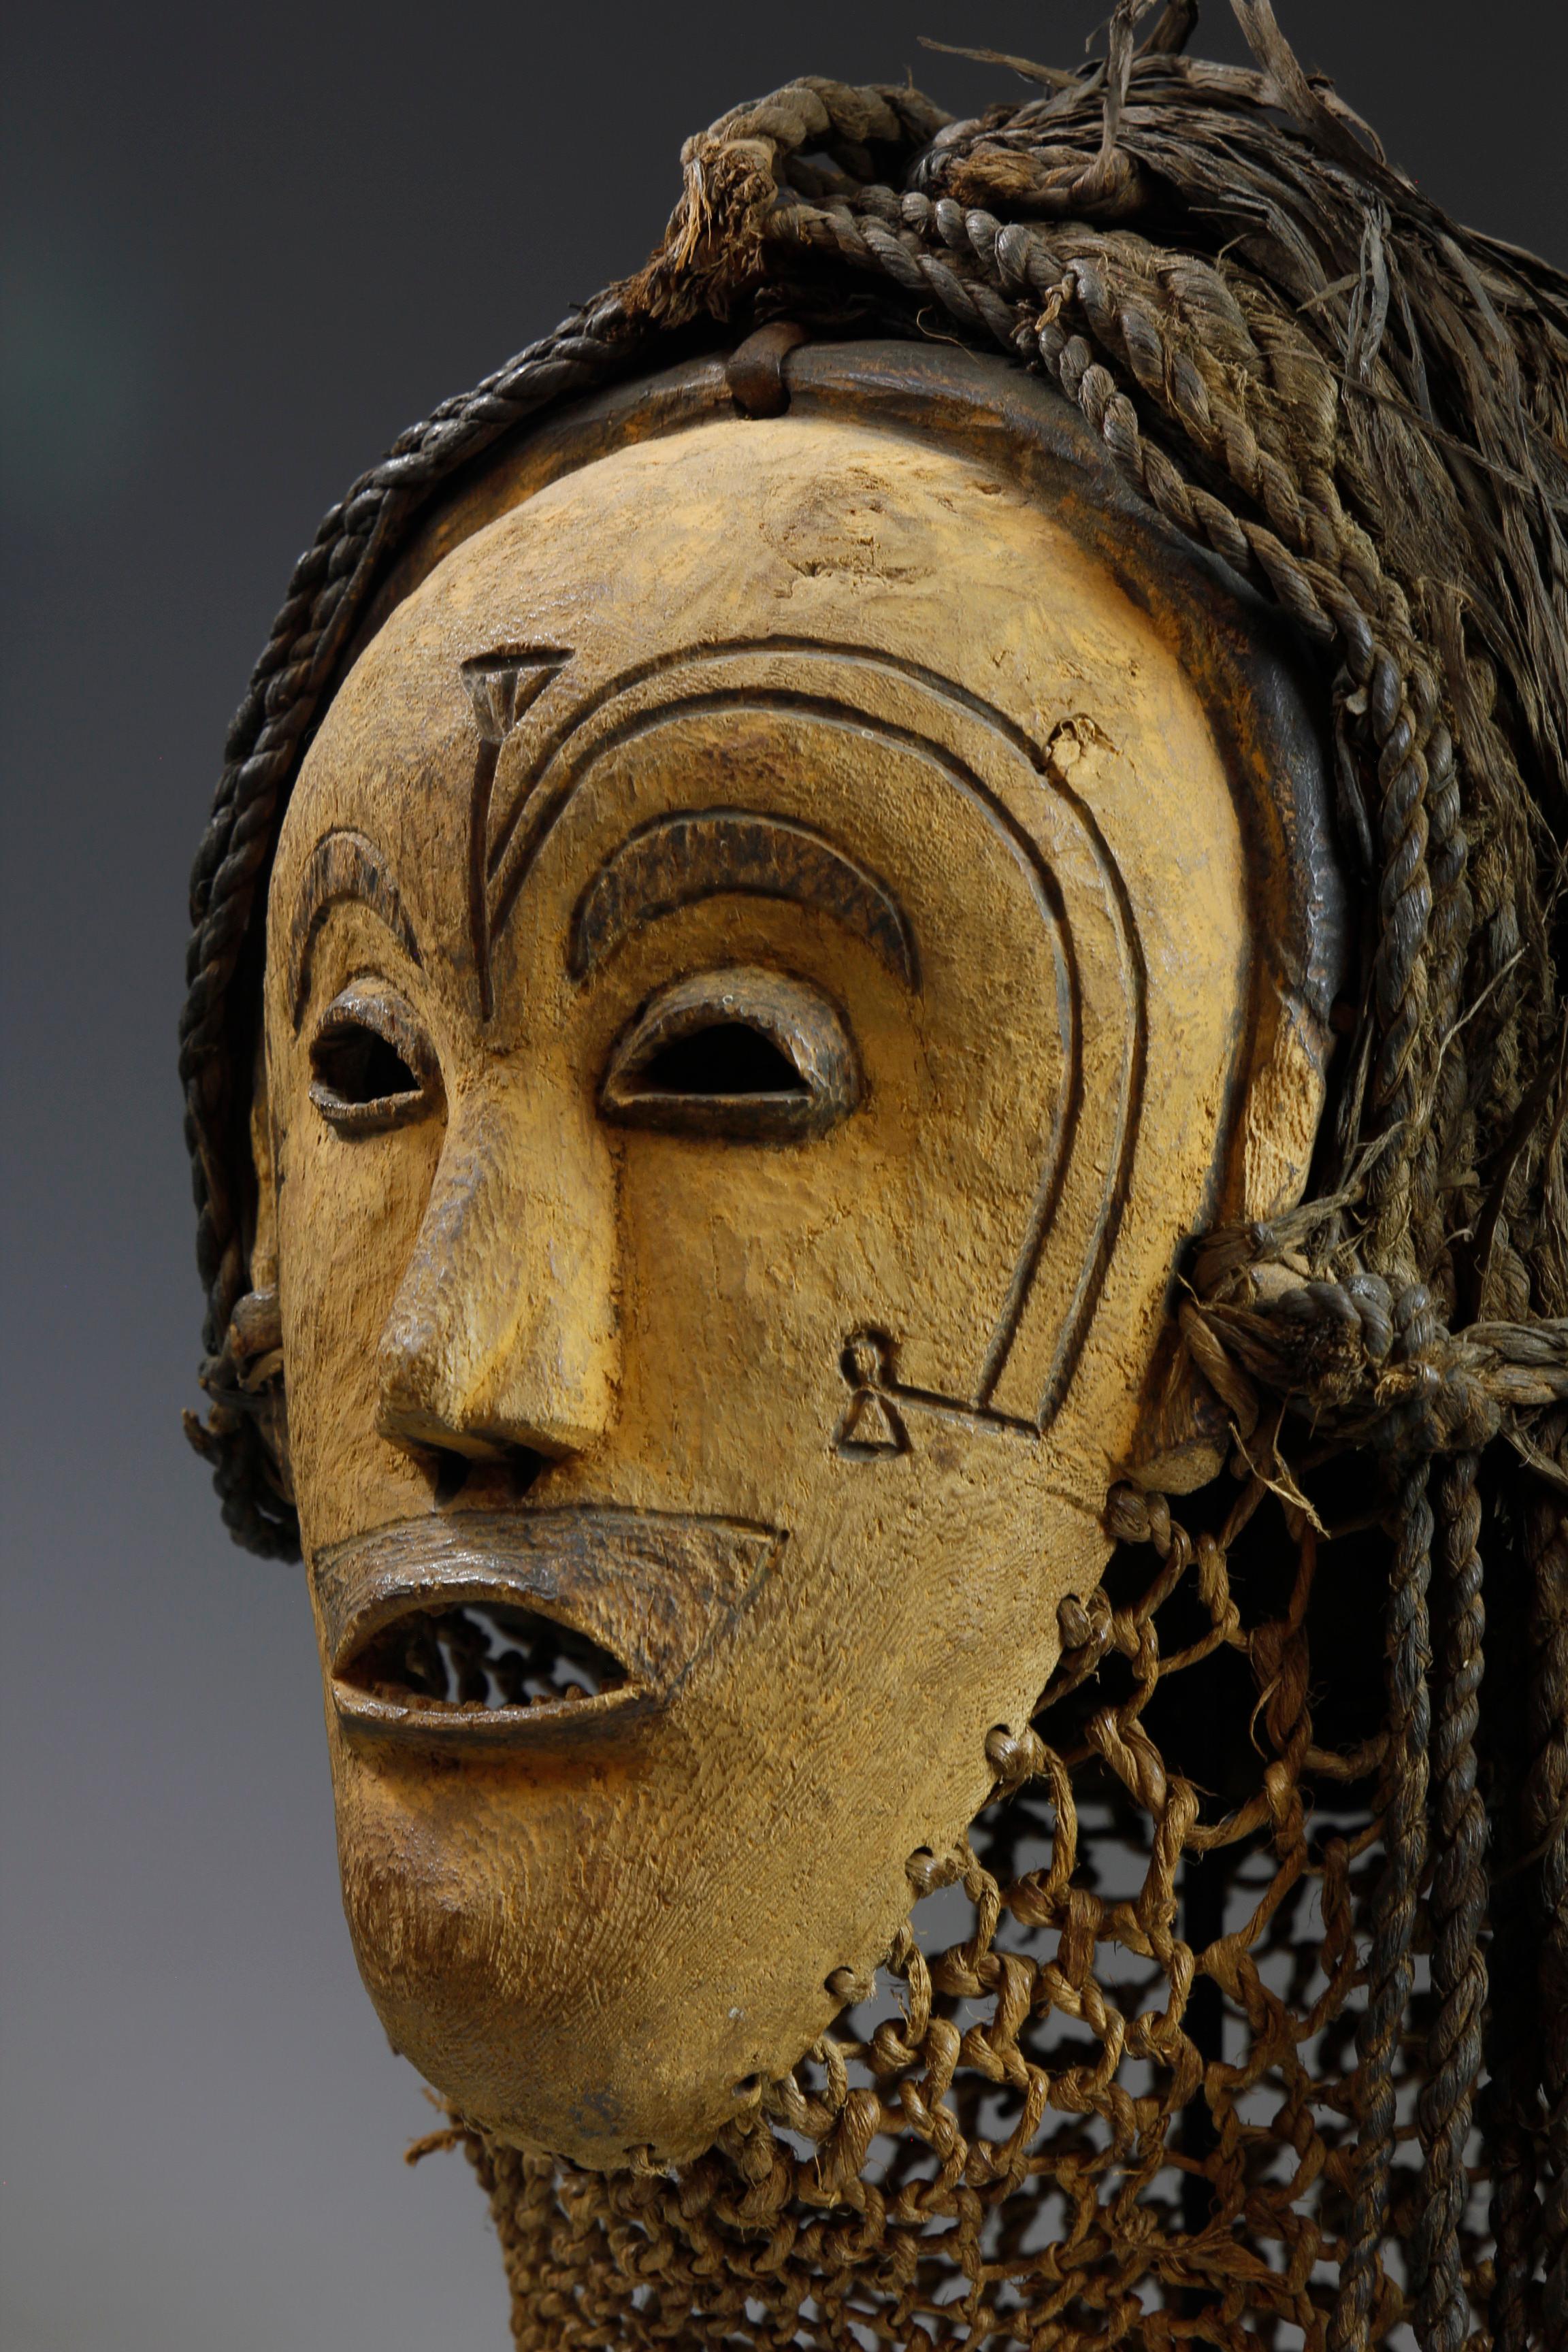 This early twentieth-century mask, from the Chokwe culture in Angola, displays unusual features. Carved from a light wood and decorated with yellow pigments, this fine mask exhibits rare facial markings, which have been scorched onto the surface. A